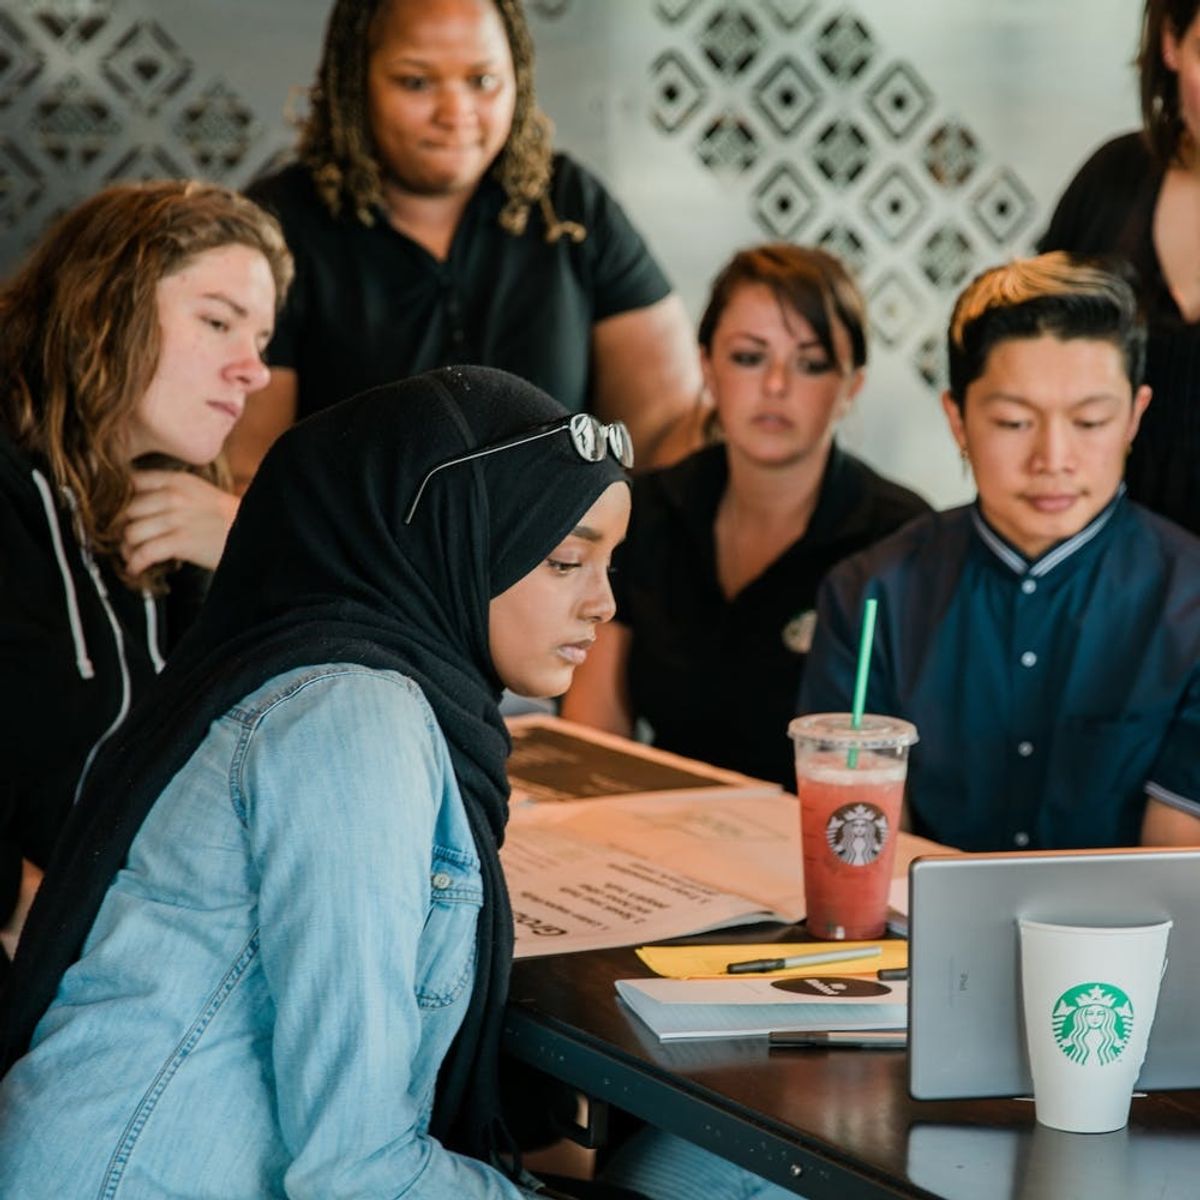 You Need to Watch the Powerful Racial Bias Video Being Shown to Starbucks Employees